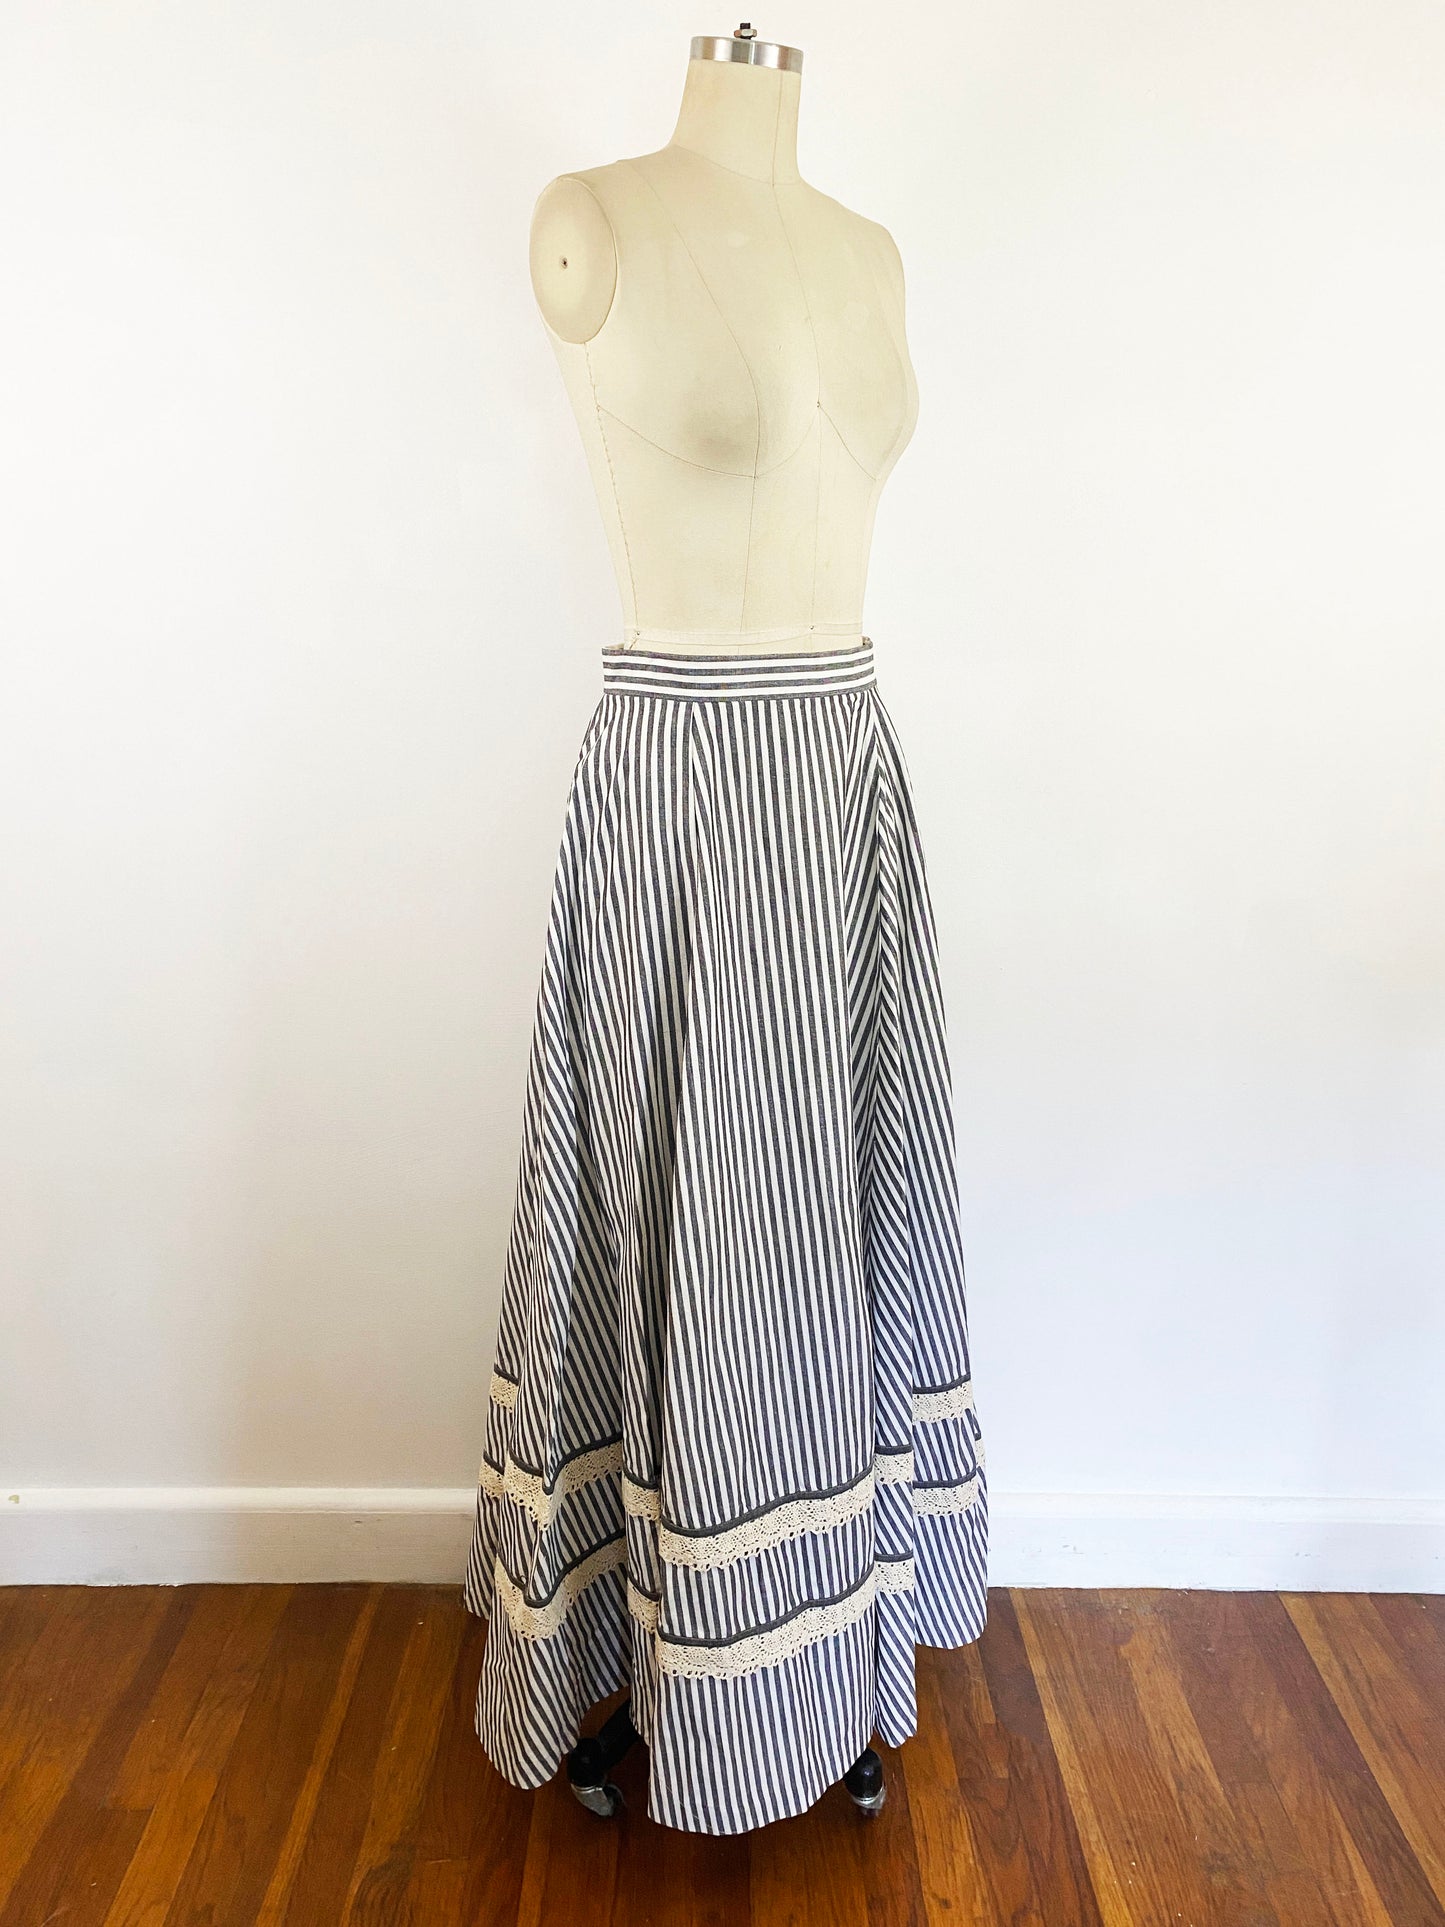 1970s Girasol by Gonzalo Bauer Gray Striped and Natural Cotton Lace Full Maxi Skirt Prairie Skirt Mexican Designer / Medium